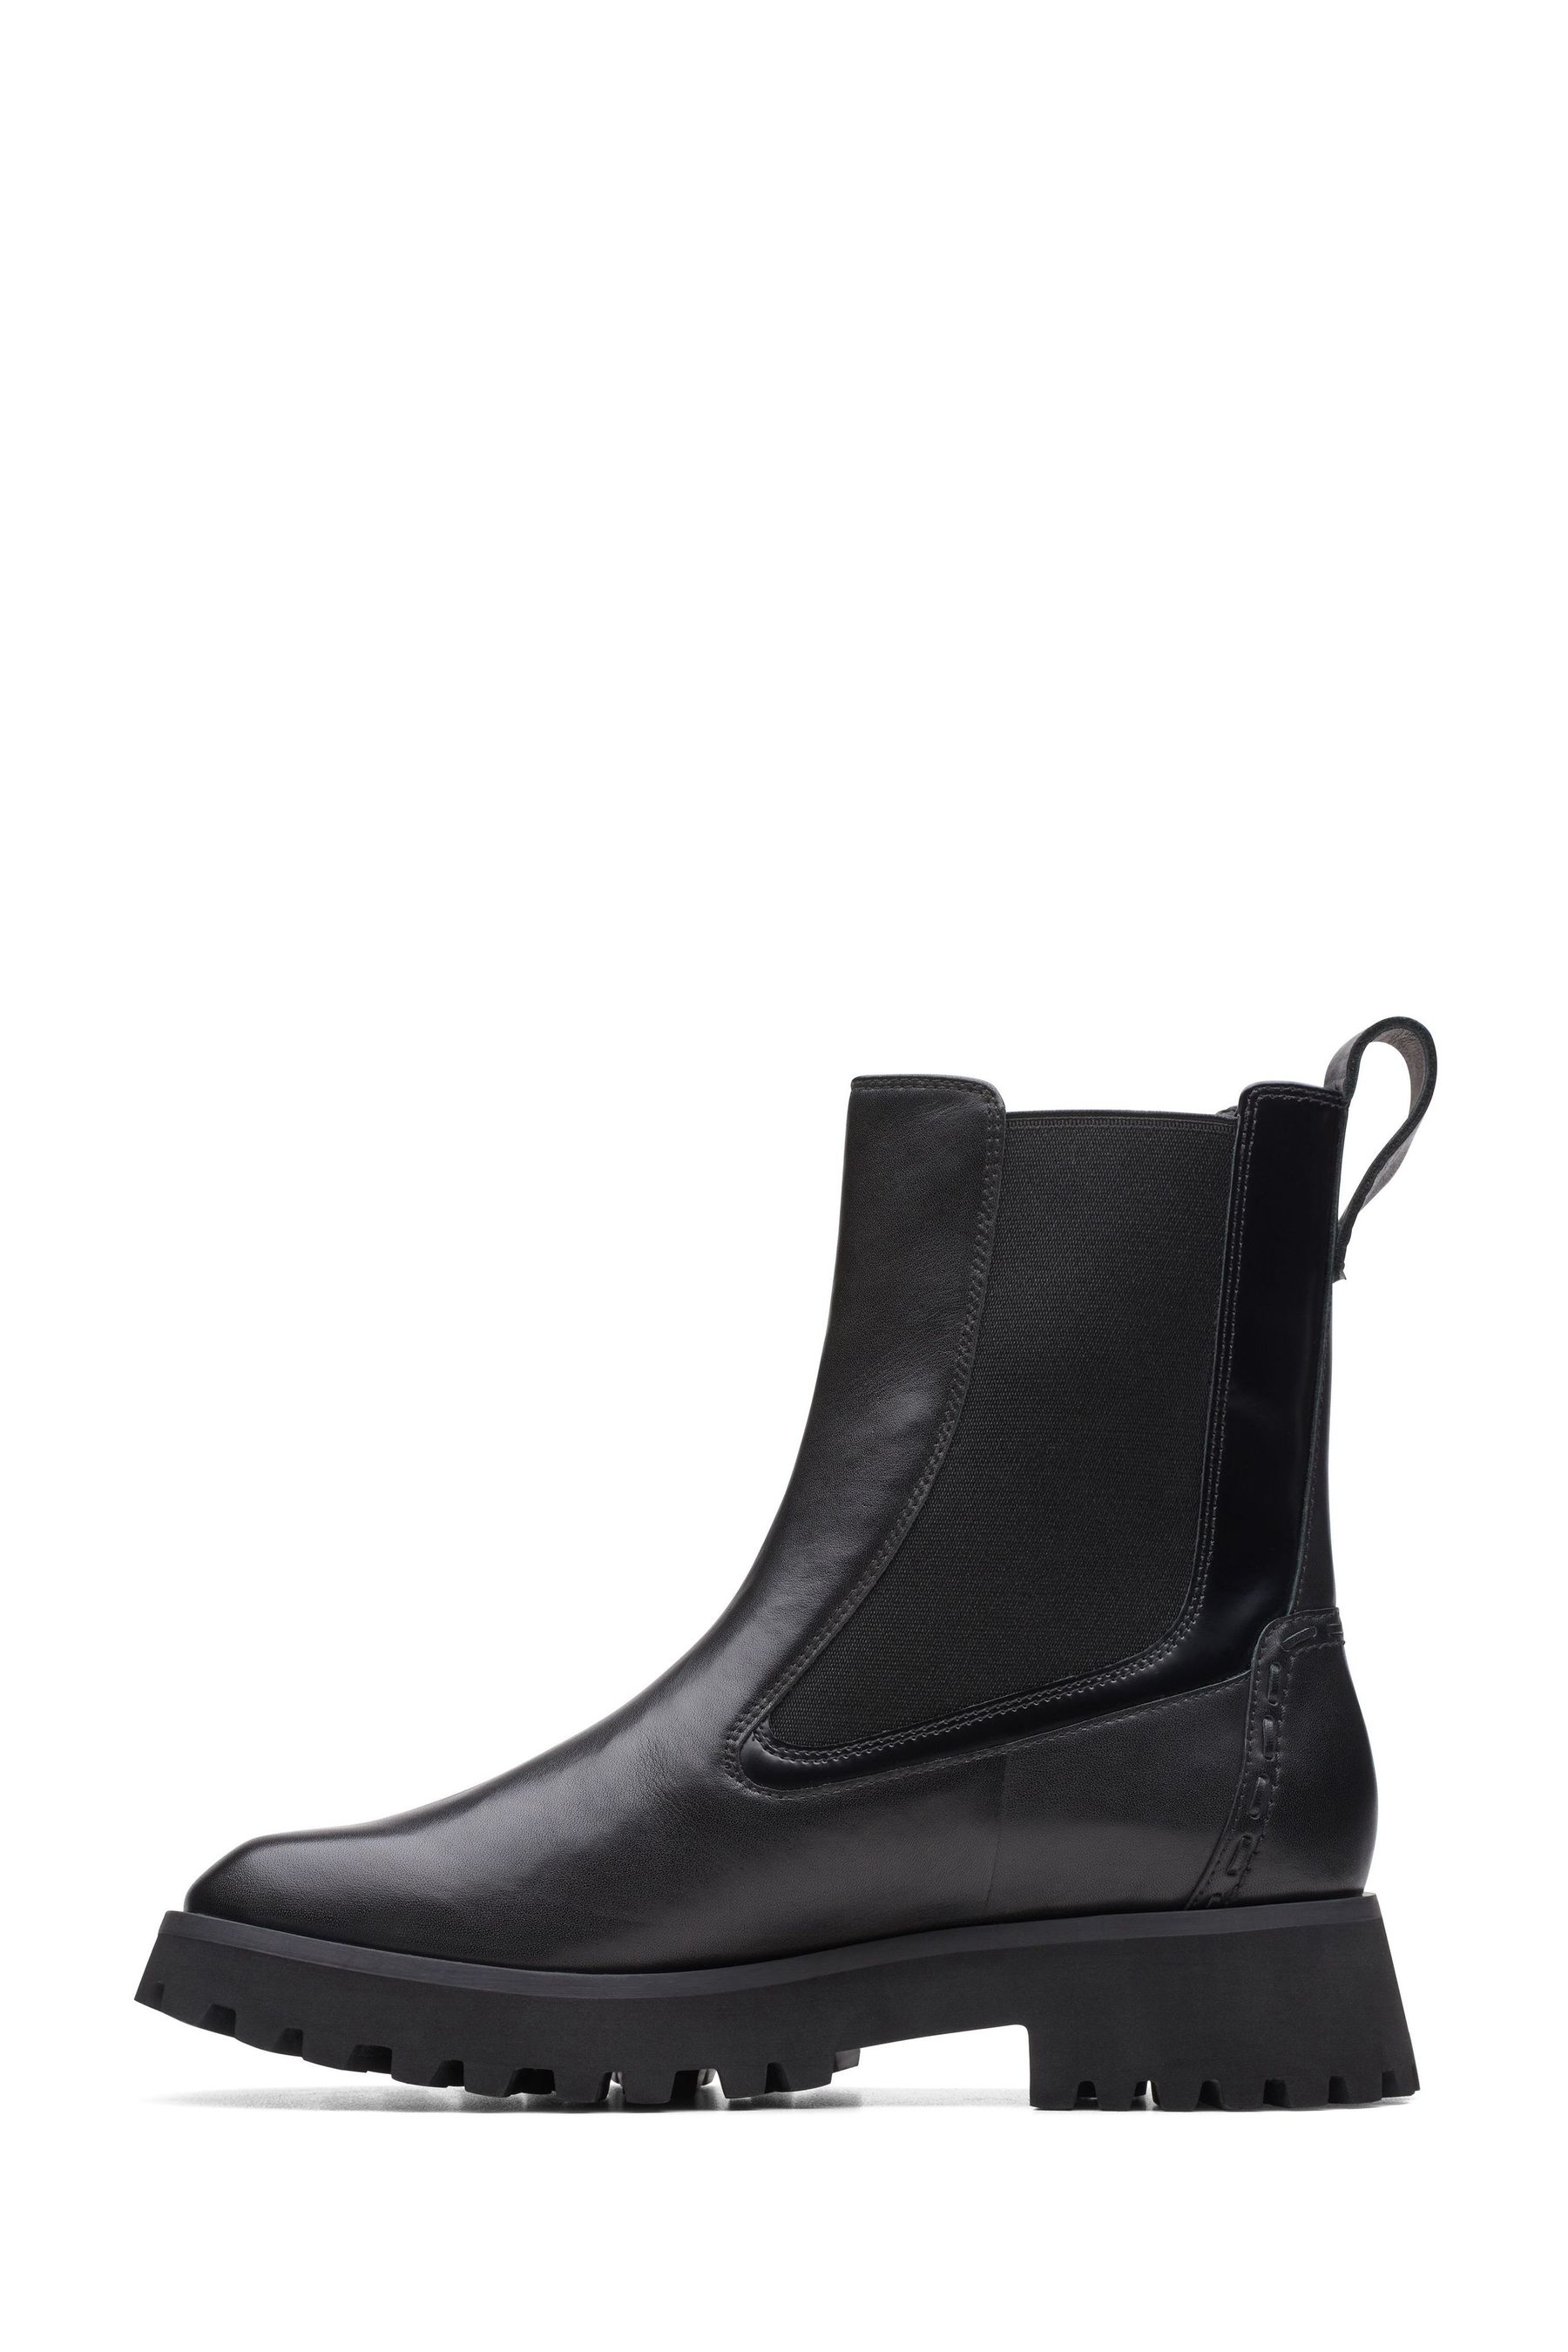 Buy Clarks Leather Stayso Rise Boots from the Next UK online shop